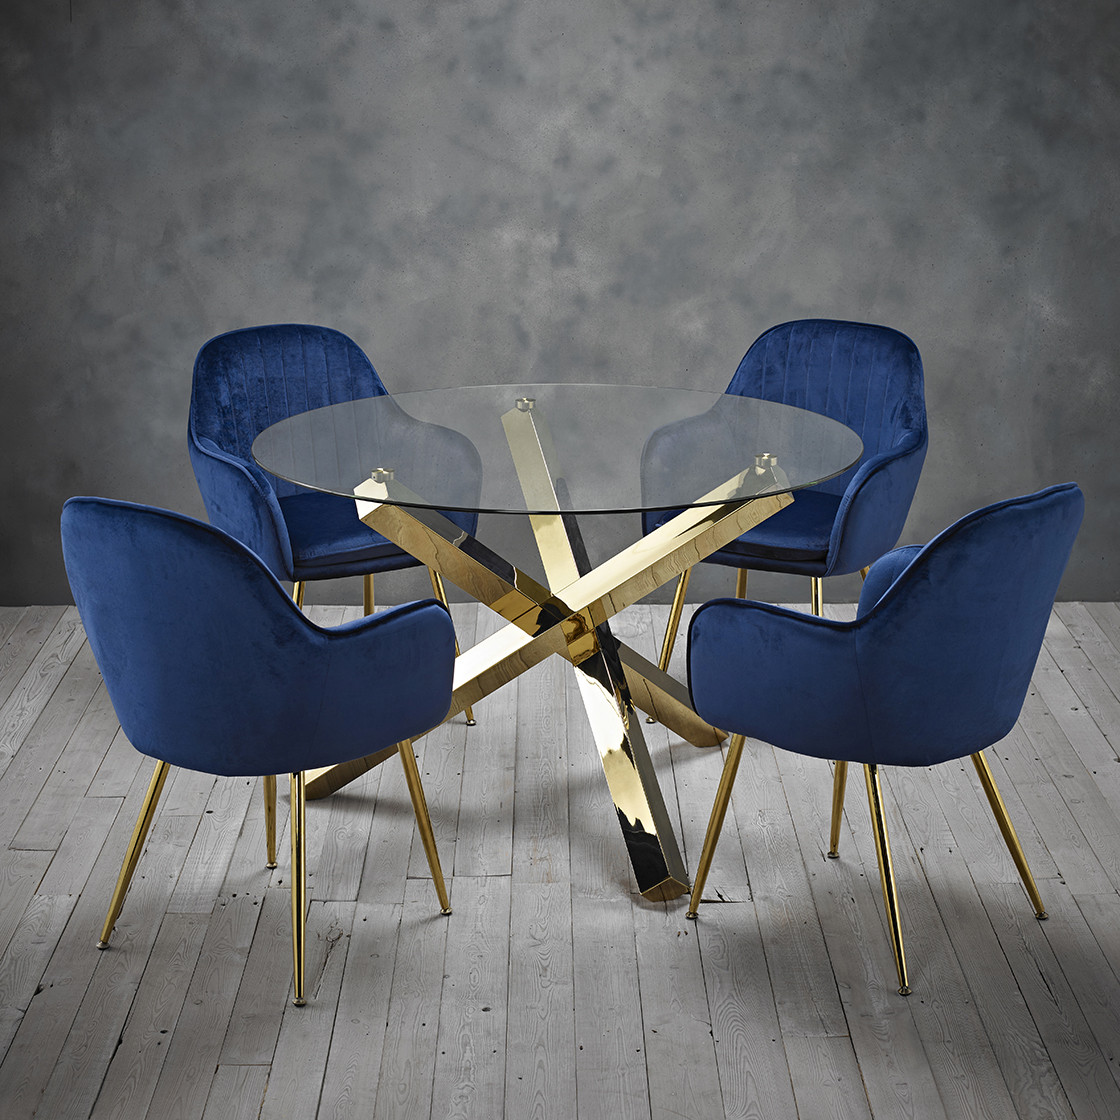 Lara Dining Chair Royal Blue With Gold Legs (Pack of 2)